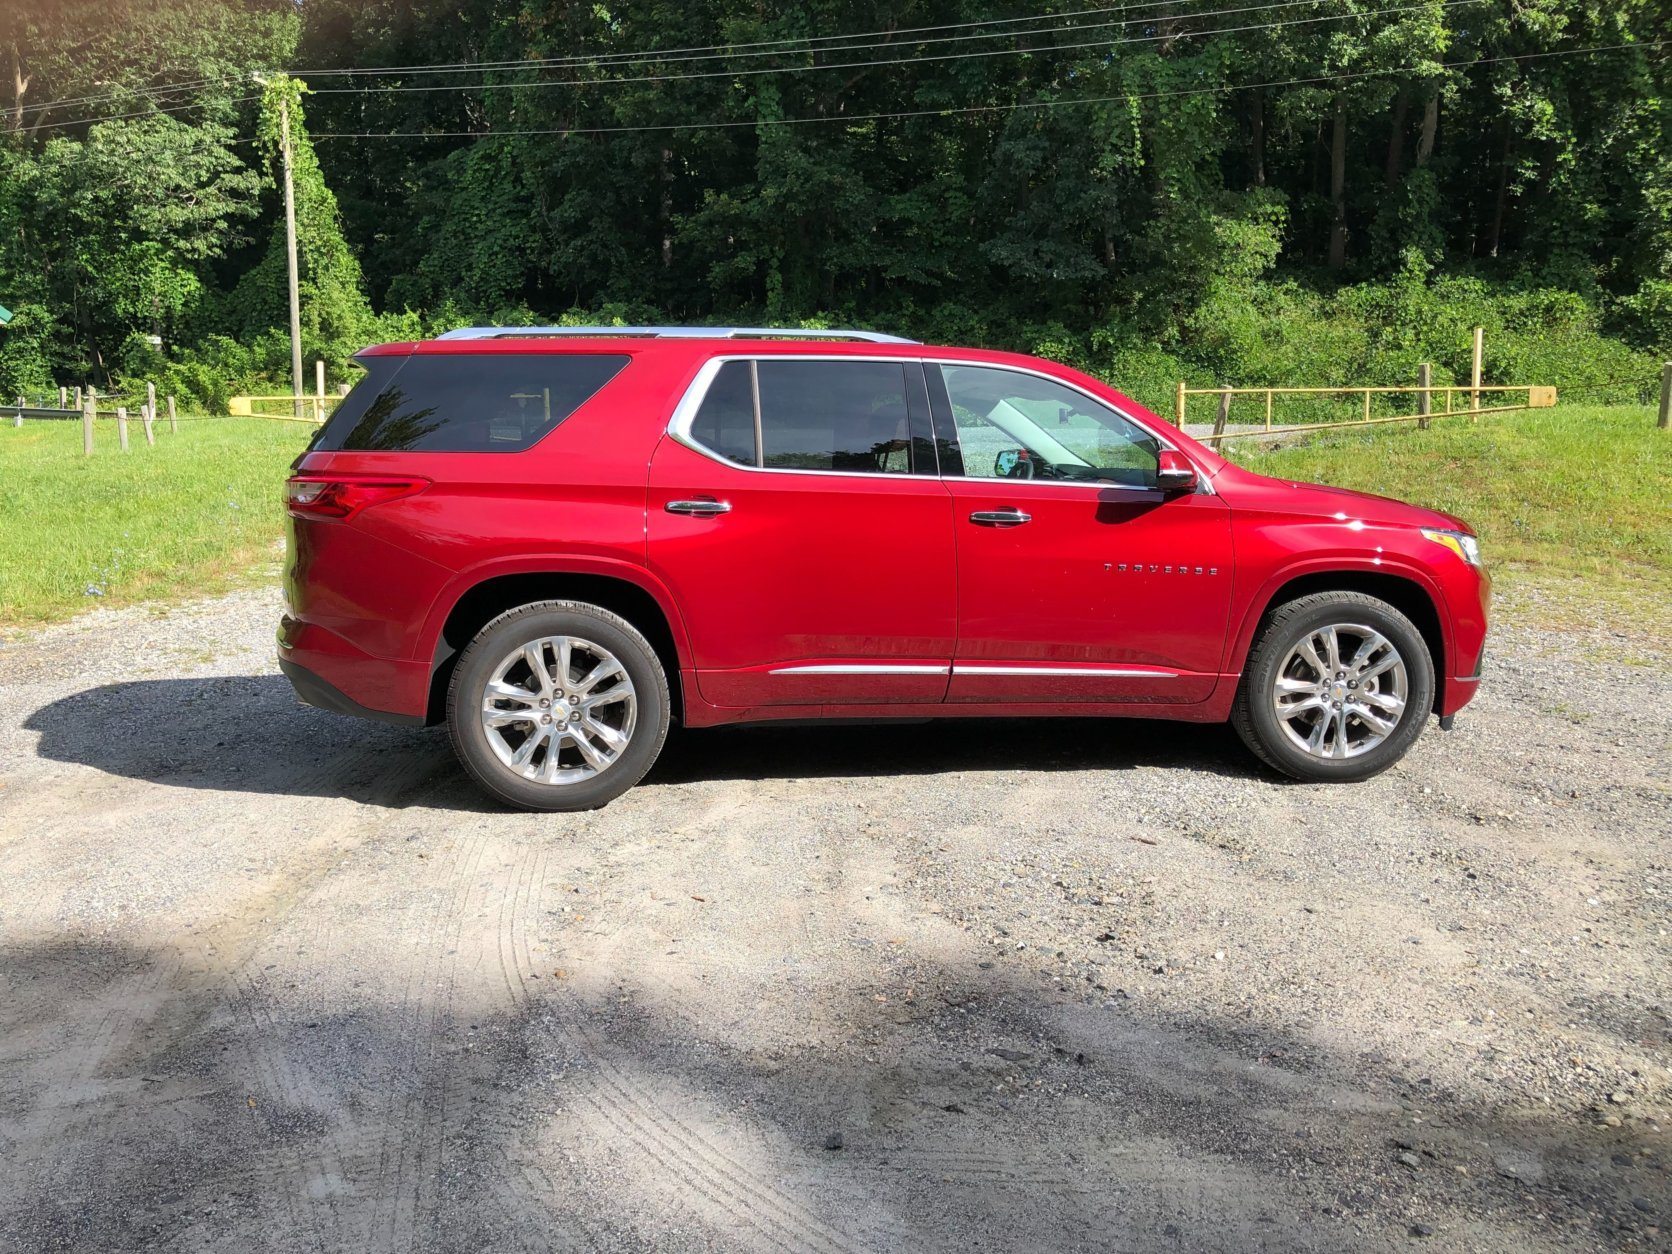 <p>While not as car-like as some crossovers, the Traverse is more confidence-inspiring than before when it comes to the ride. It handles a bit better and takes all but the bigger bumps without drama. Taking corners, it has less body lean than a large SUV but don’t expect sporty handling.</p>
<p>While the old Traverse had full-time AWD the new Traverse can be switched between FWD and AWD with the turn of a knob. The V6 has plenty of power with 310hp. I had no problem keeping up with traffic. The nine-speed automatic was always trying to seek a higher gear even when I didn’t want it to, taking a bit of time to downshift when I needed to accelerate at times.</p>
<p>The upscale Chevrolet Traverse High Country is a welcome addition to the Chevy crossover lineup. Now you can have a more luxurious three-row crossover with even more space than some larger more costly SUVs.</p>
